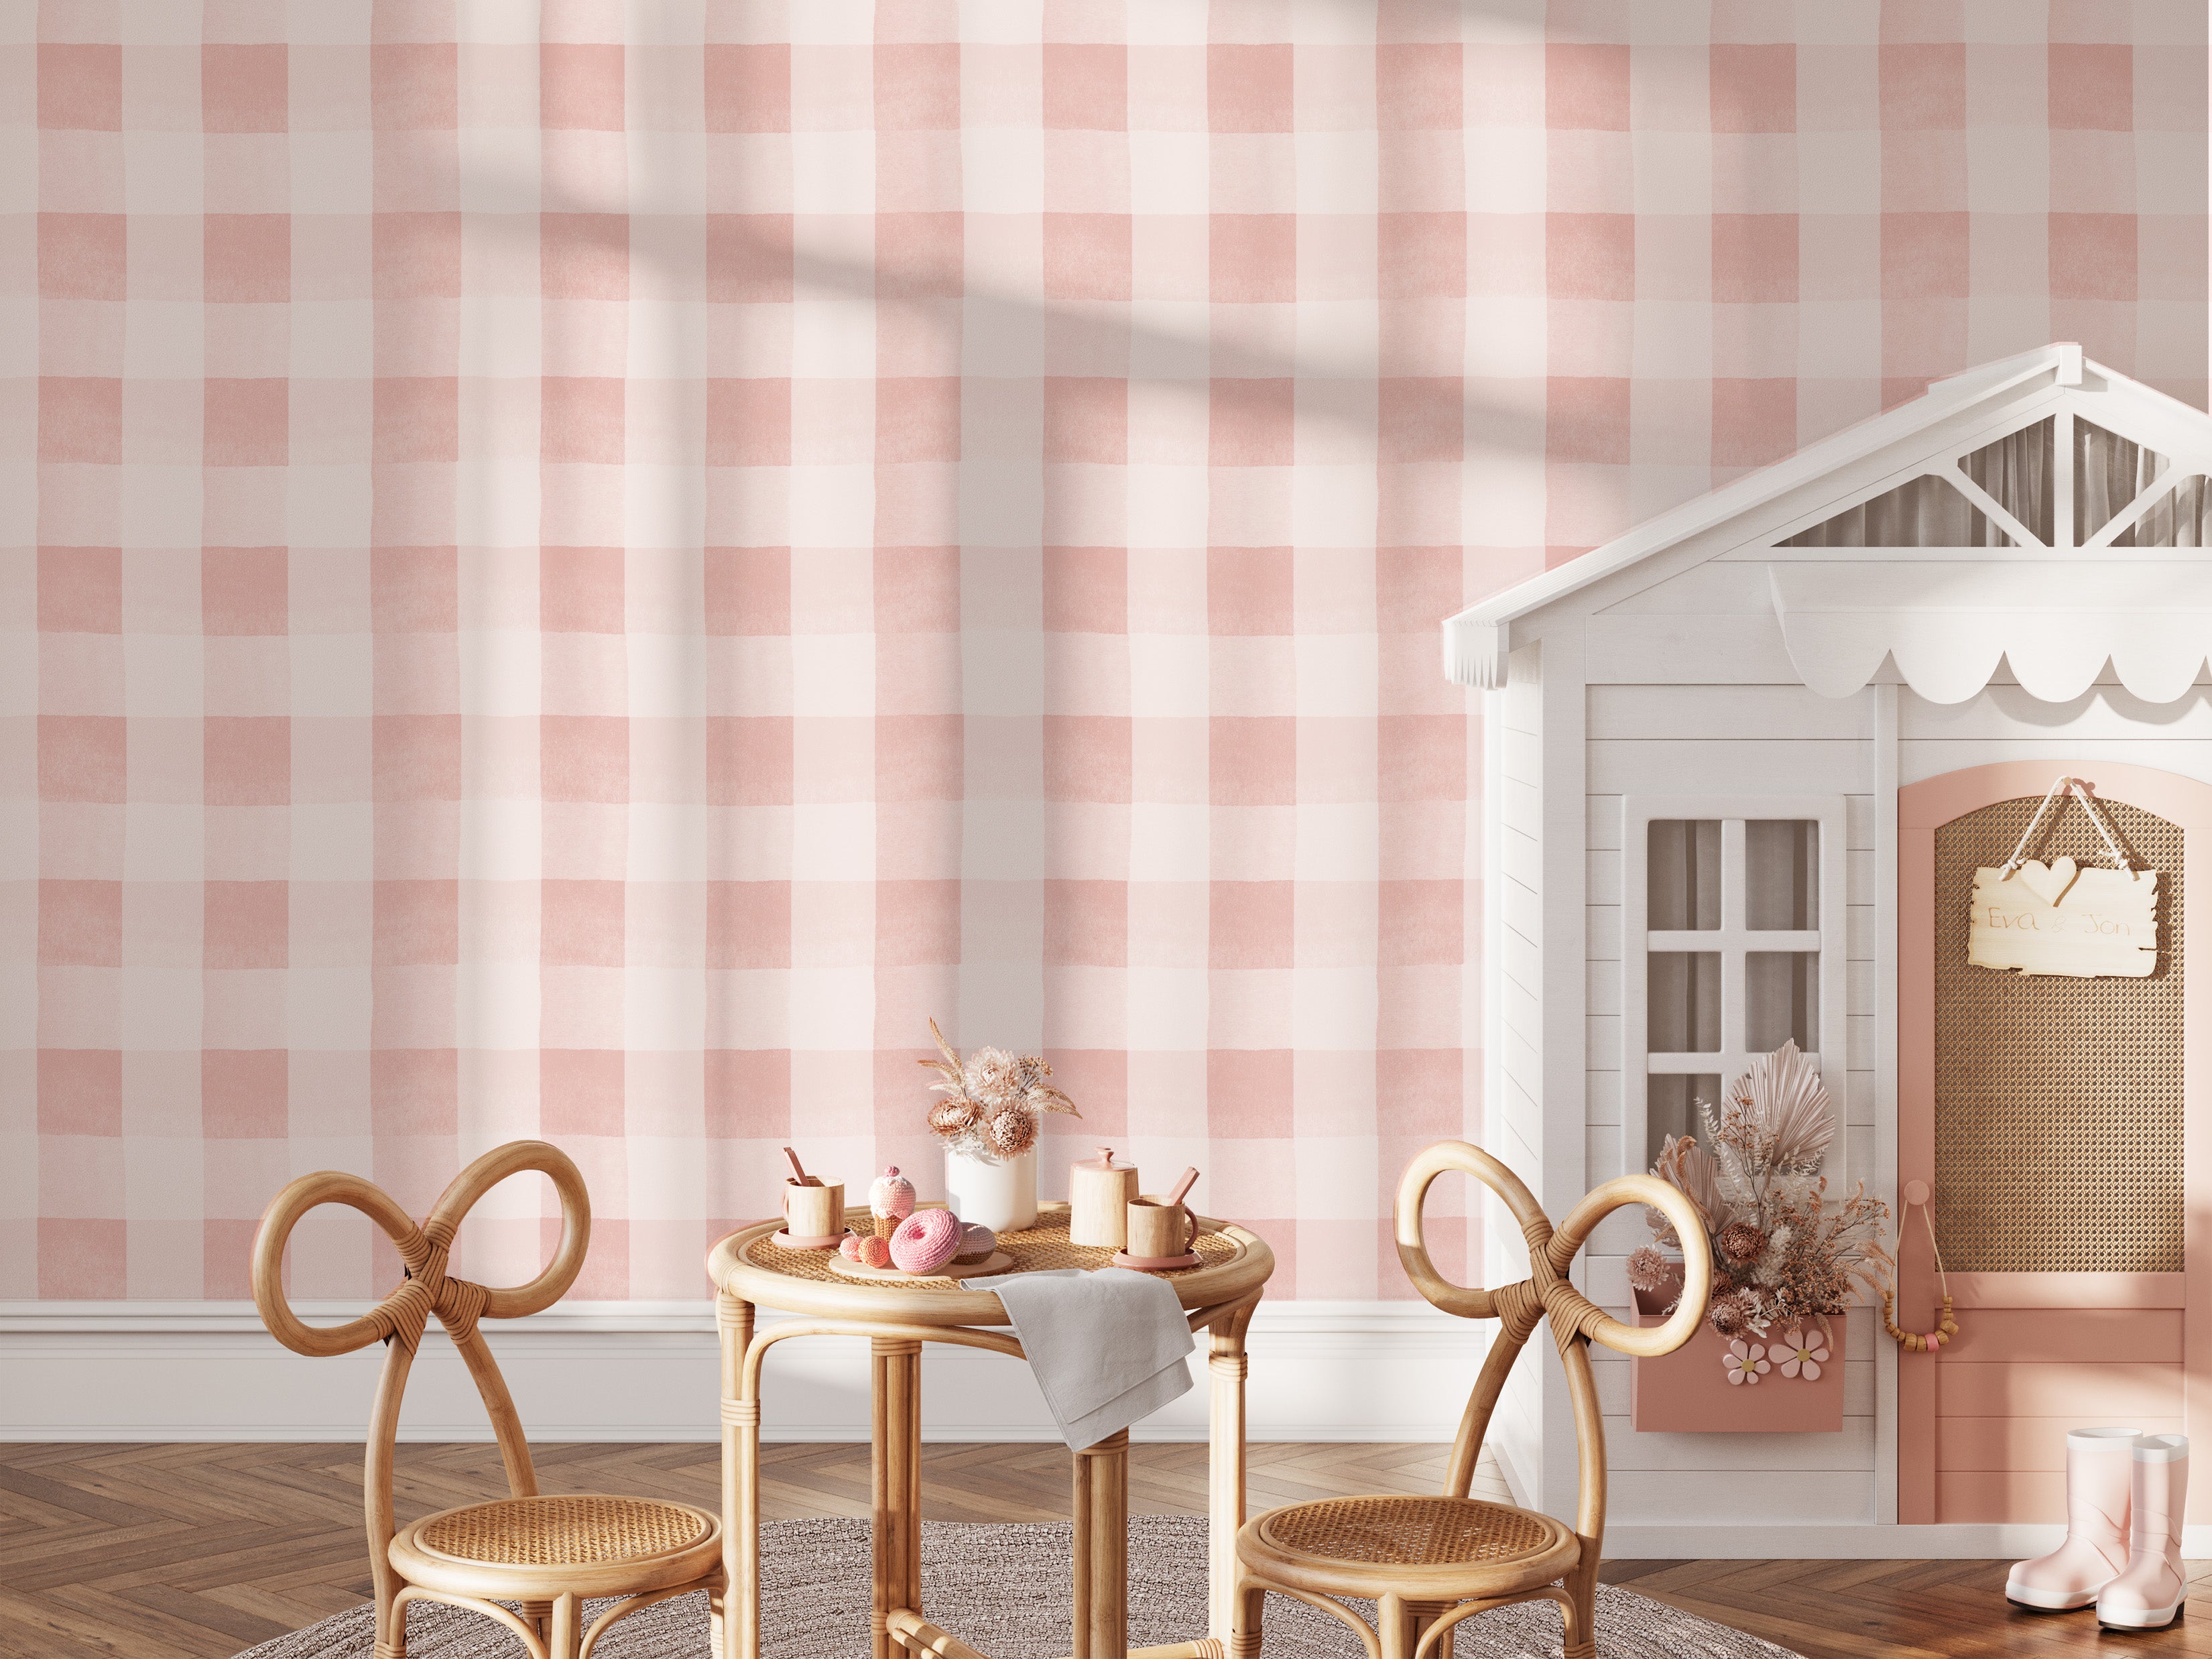 A stylish children's play area adorned with Camille Wallpaper in dusty pink. The gentle checkered pattern creates a playful yet sophisticated backdrop for the whimsical child-sized furniture and decor, enhancing the room's charming and inviting atmosphere